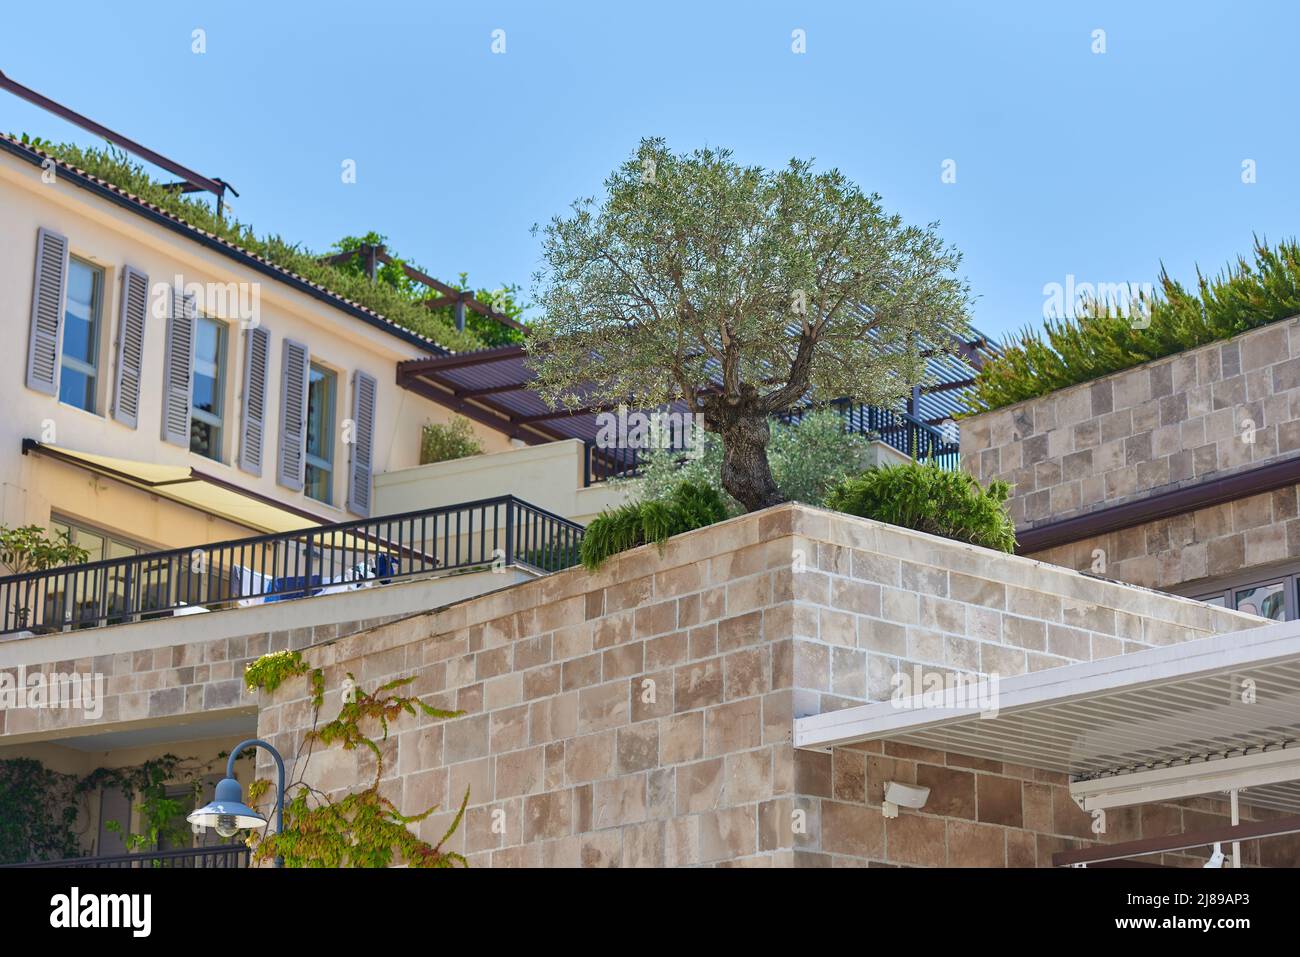 Roof garden with tree on a residential building Stock Photo